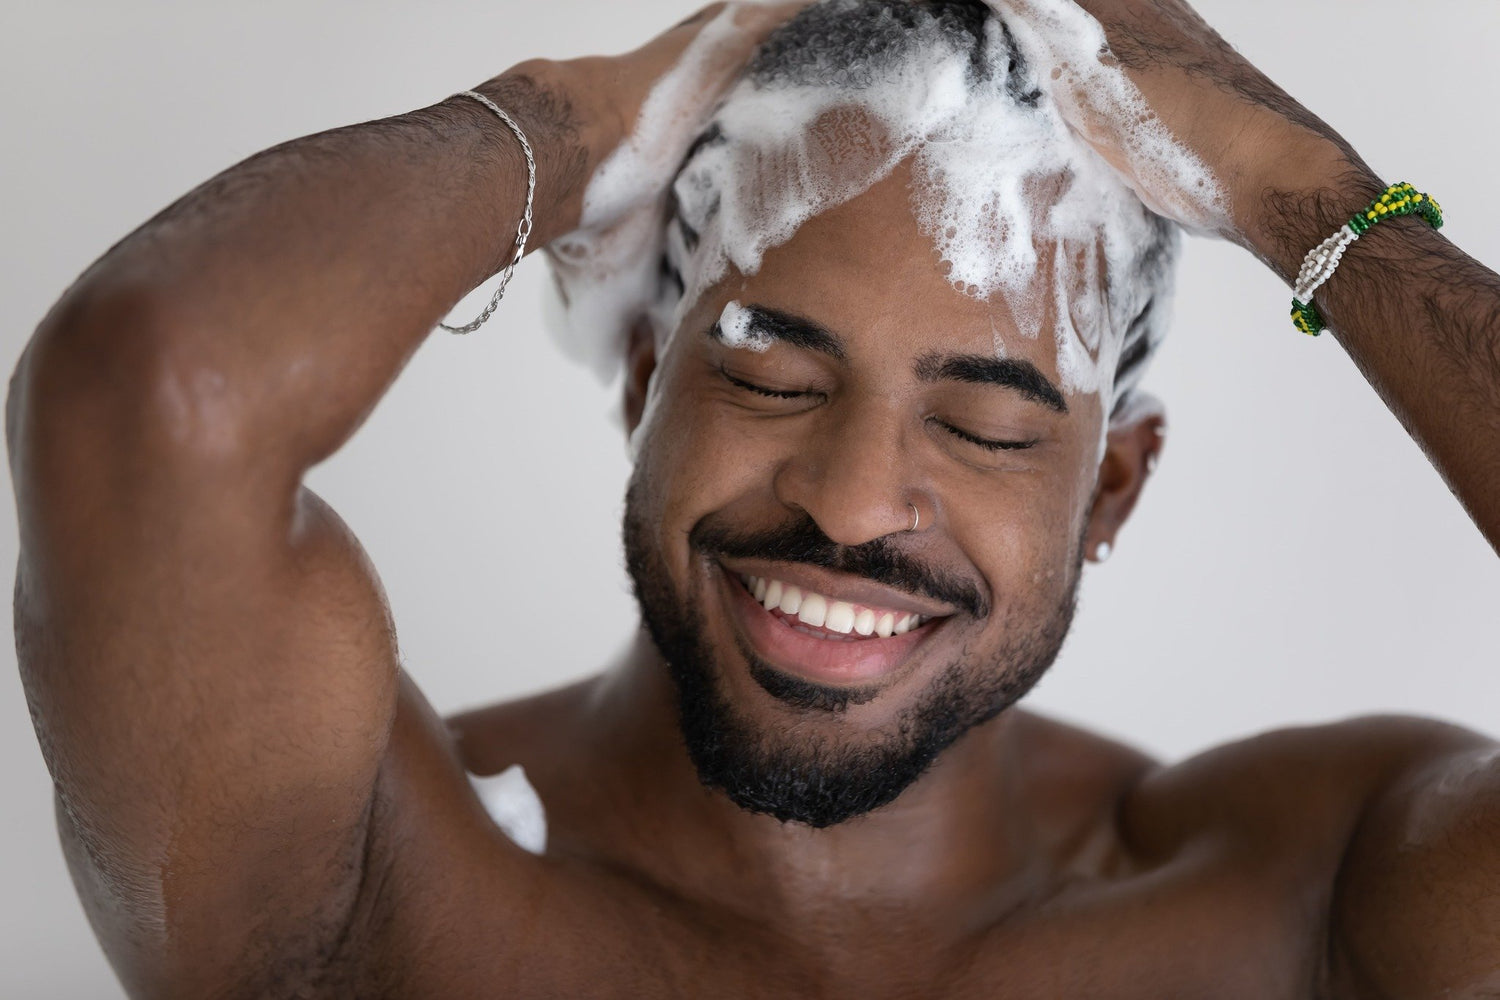 How Can You Keep Your Hair Clean Through Every Hair Growth Cycle?